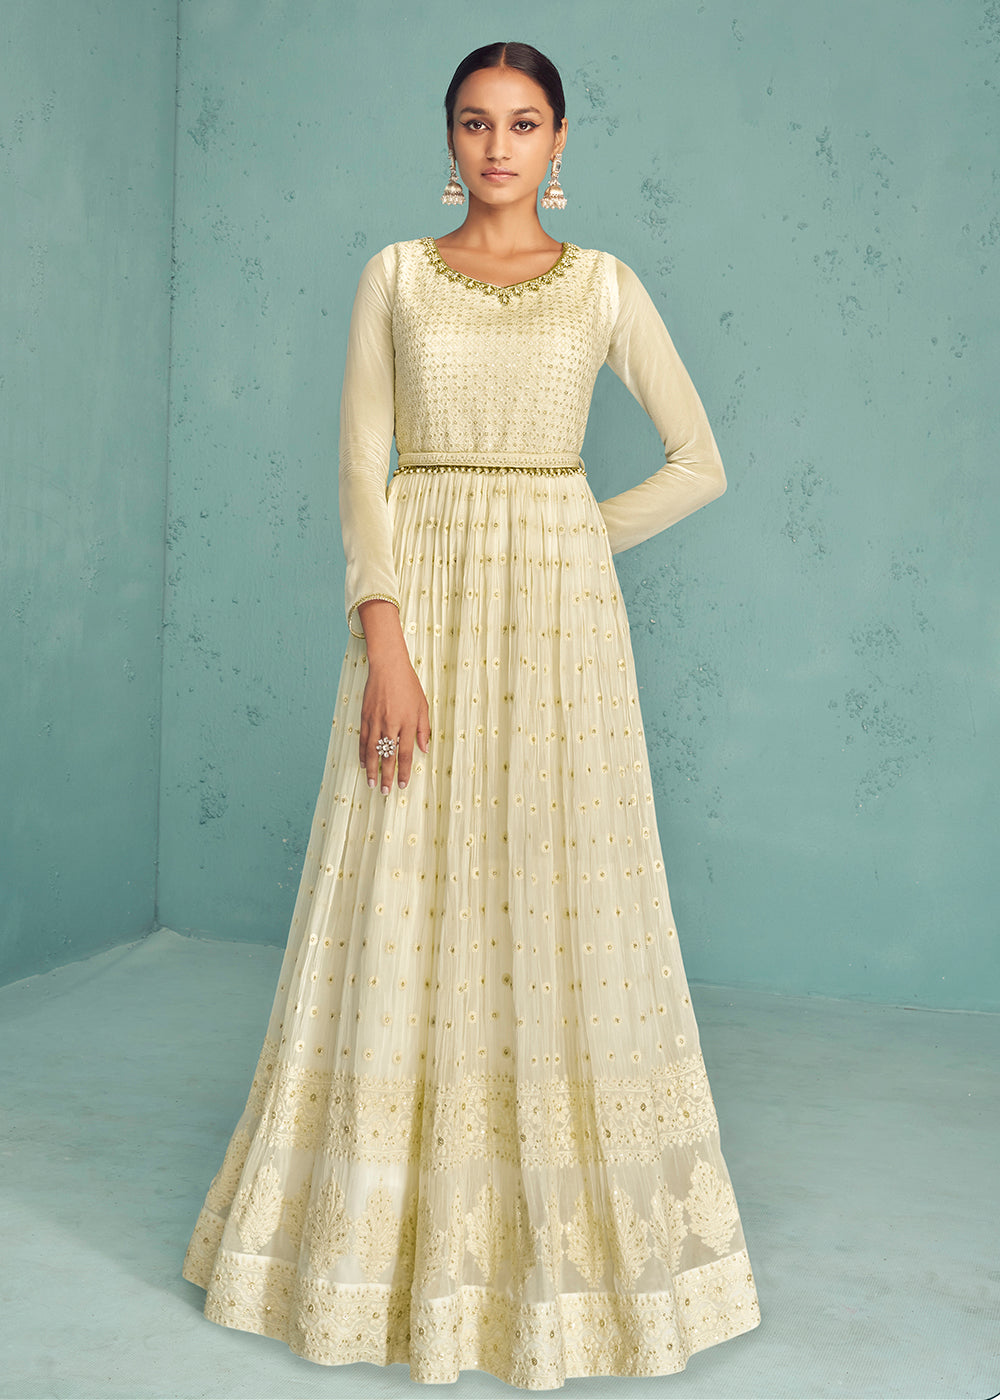 Buy Now Traditional Ivory Beige Georgette Embroidered Anarkali Suit Online in USA, UK, Australia, New Zealand, Canada & Worldwide at Empress Clothing.